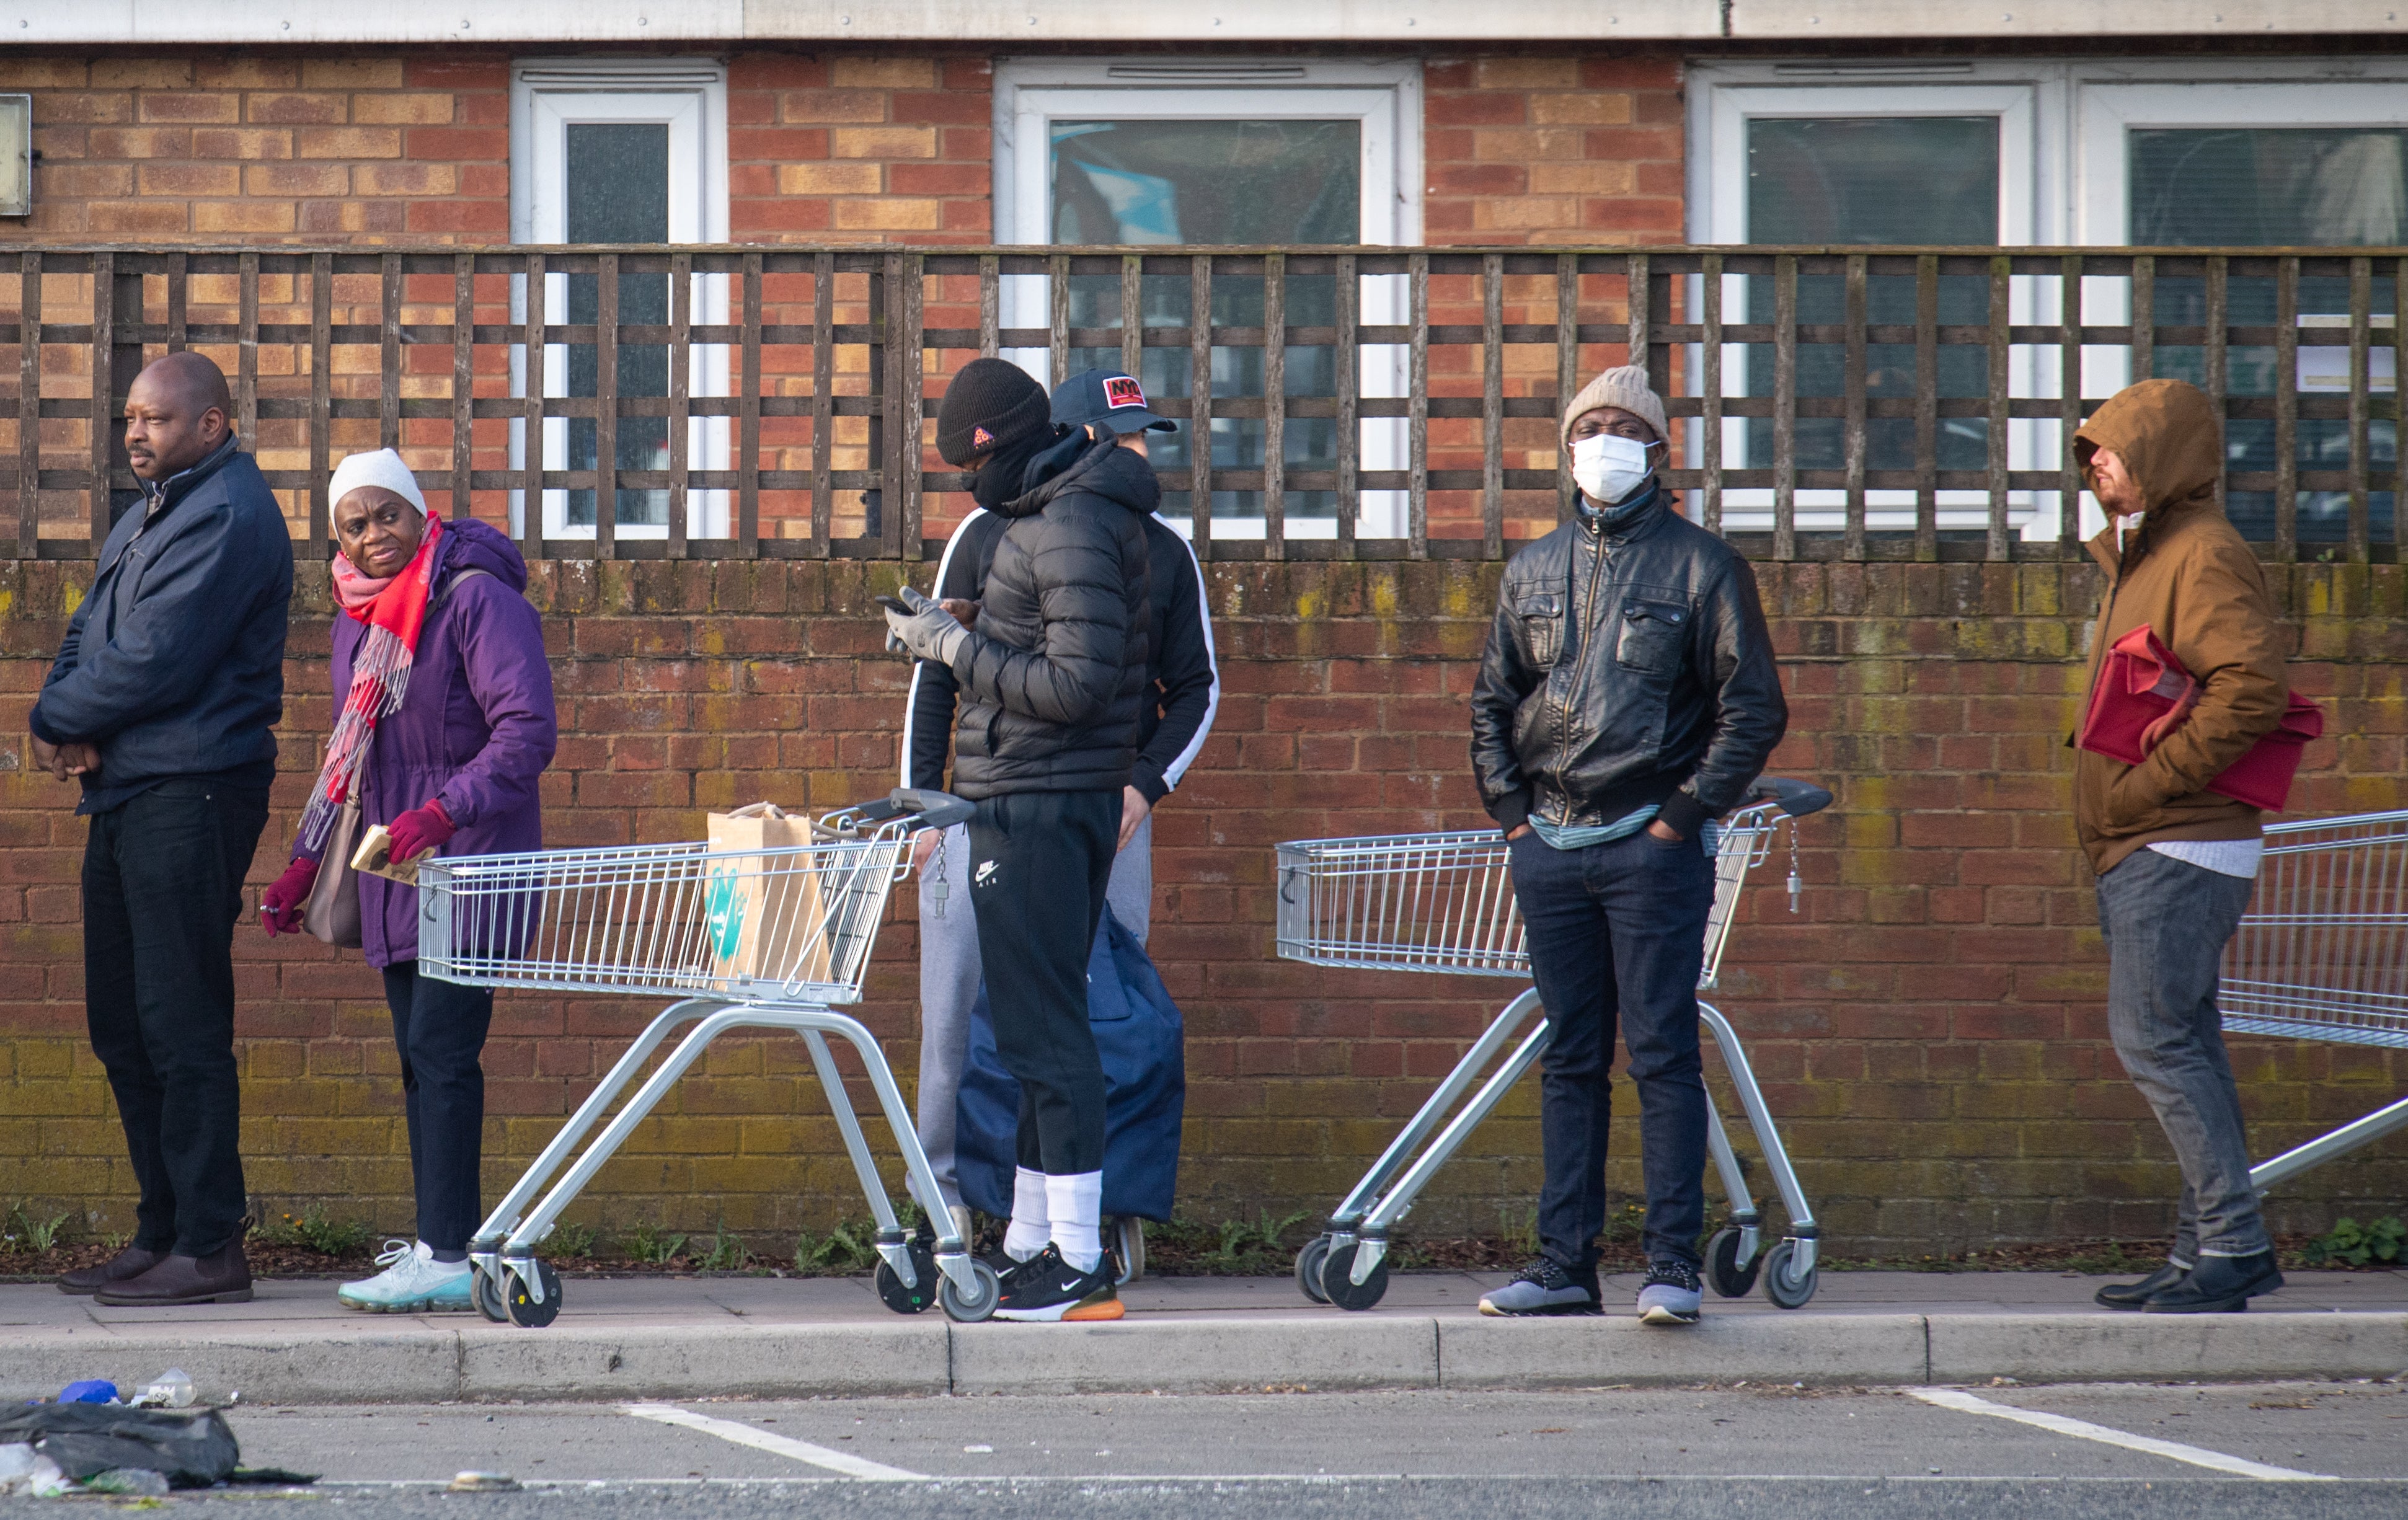 Lidl enjoyed a boost in sales as customers queued up during the pandemic to do their shopping (Dominic Lipinski / PA)